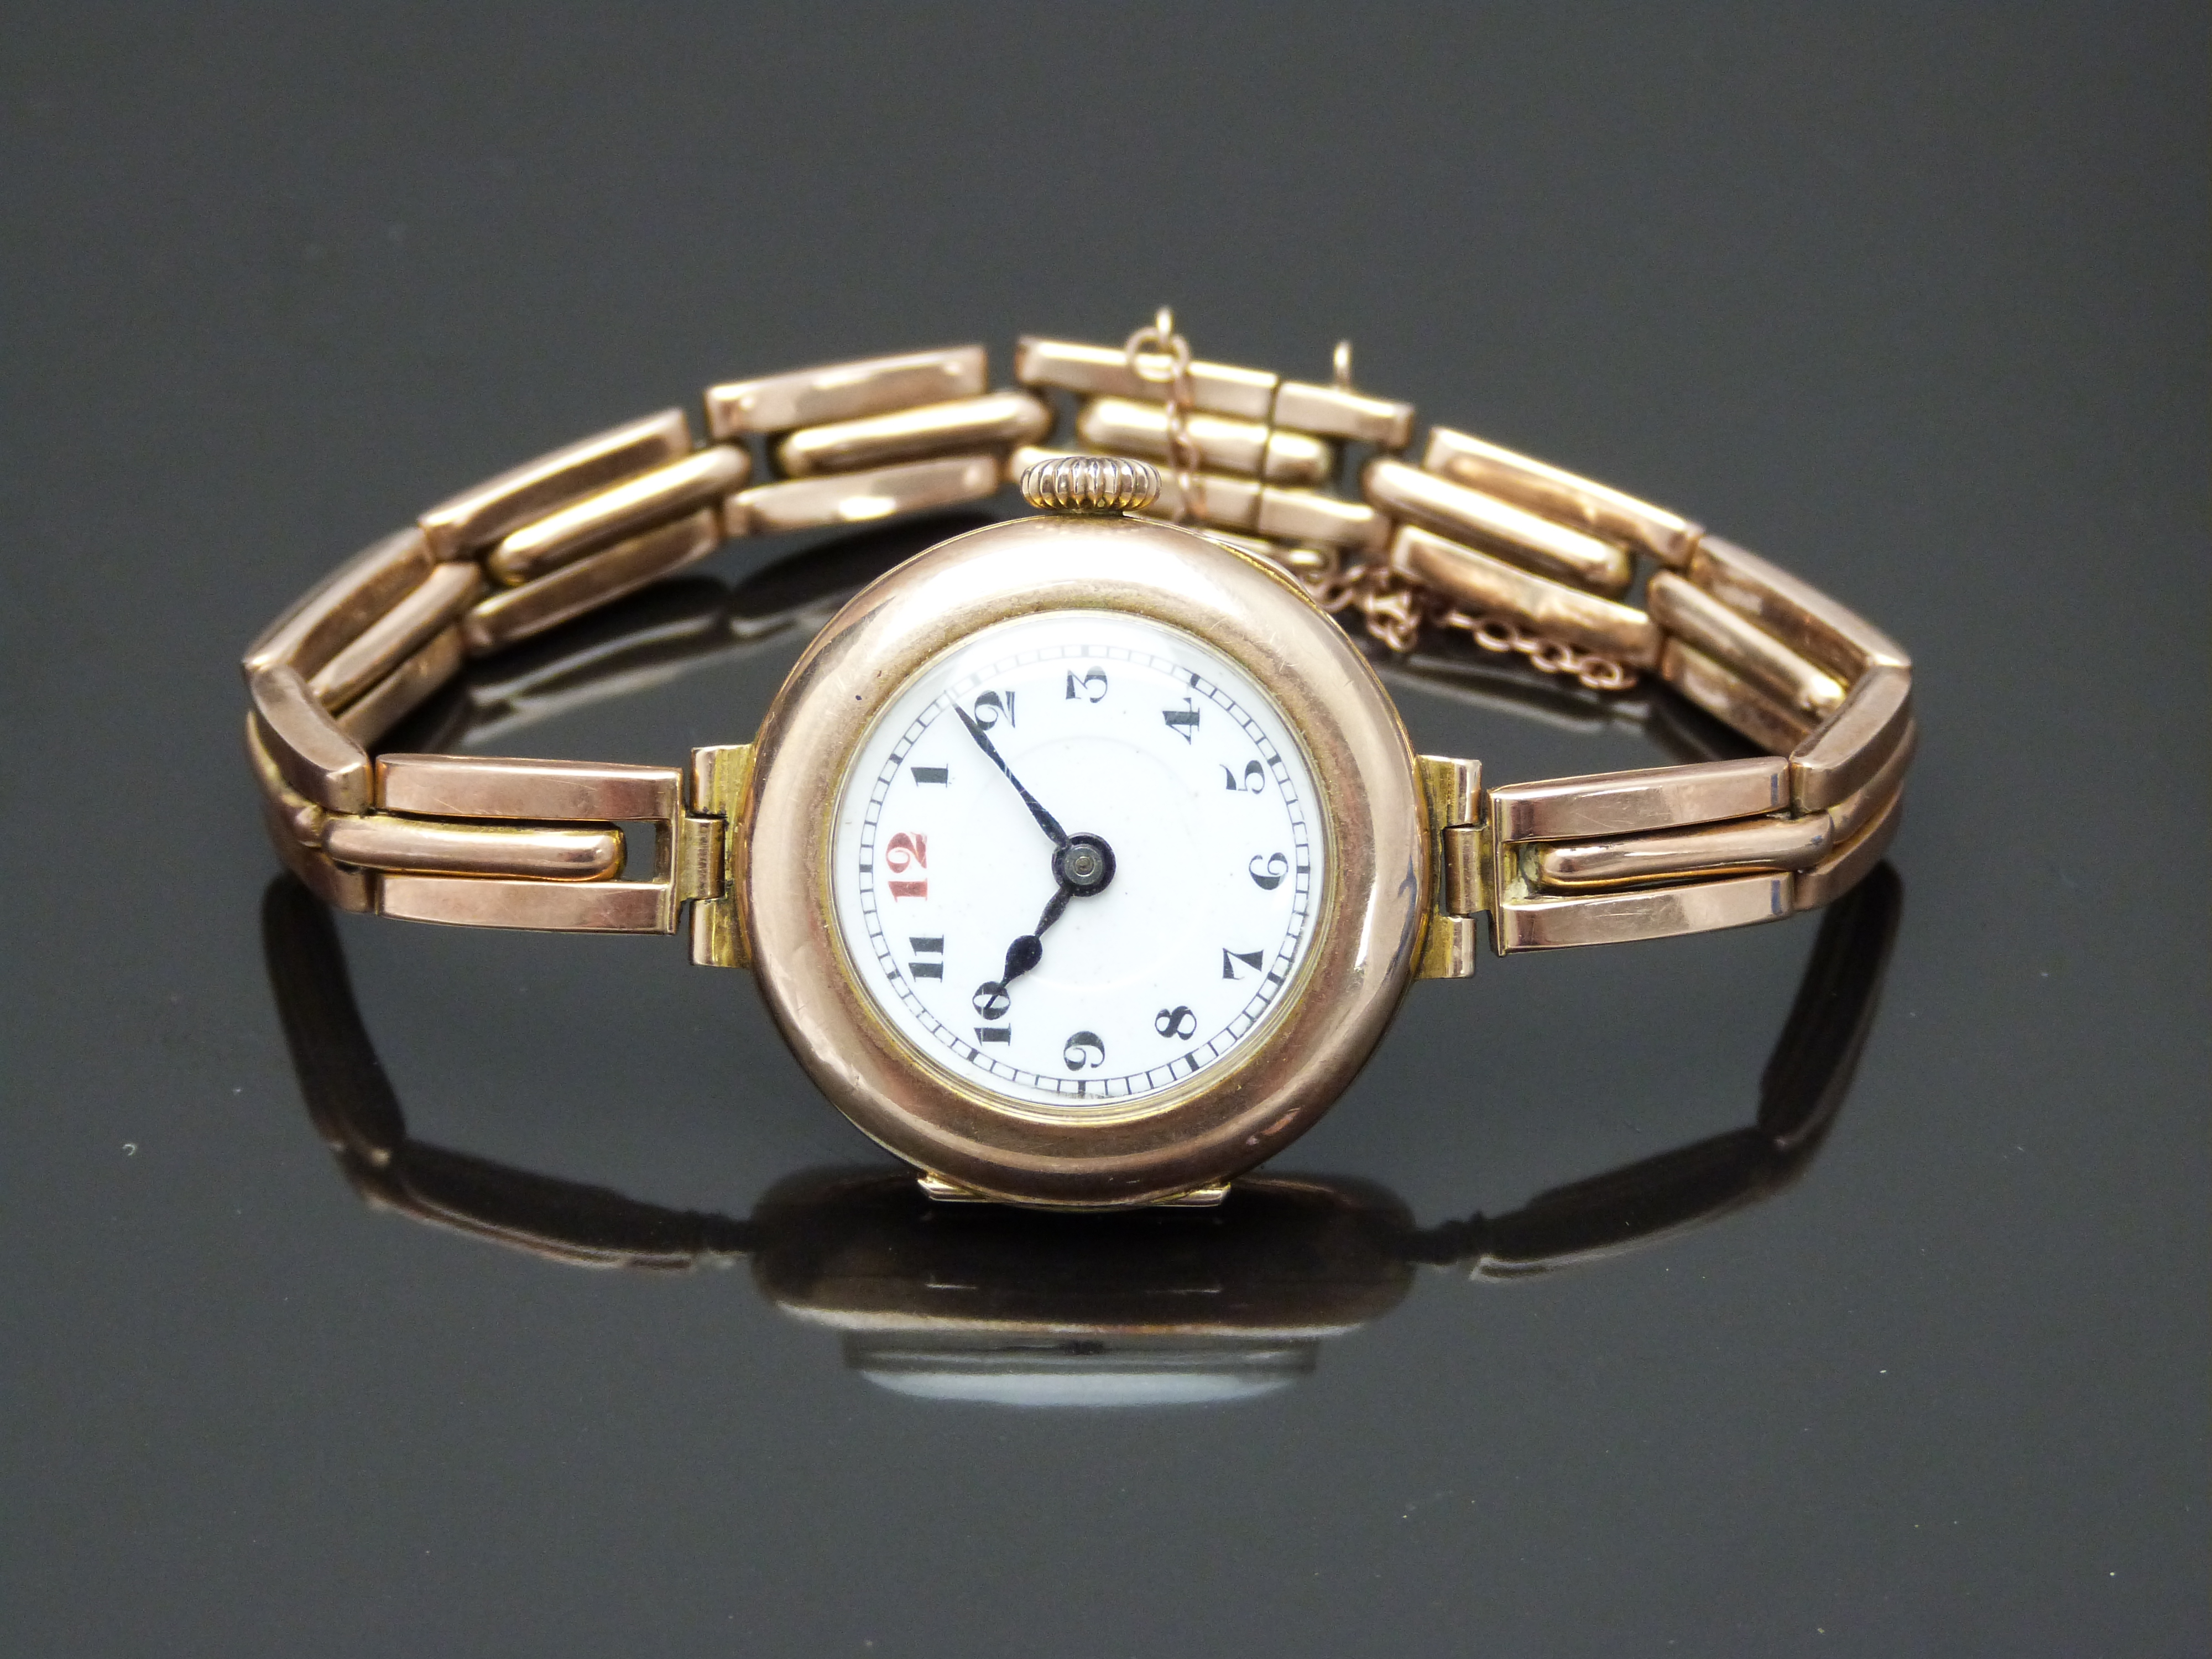 Edwardian 9ct gold ladies wristwatch with blued hands, black Arabic numerals, railroad minute track, - Image 2 of 4